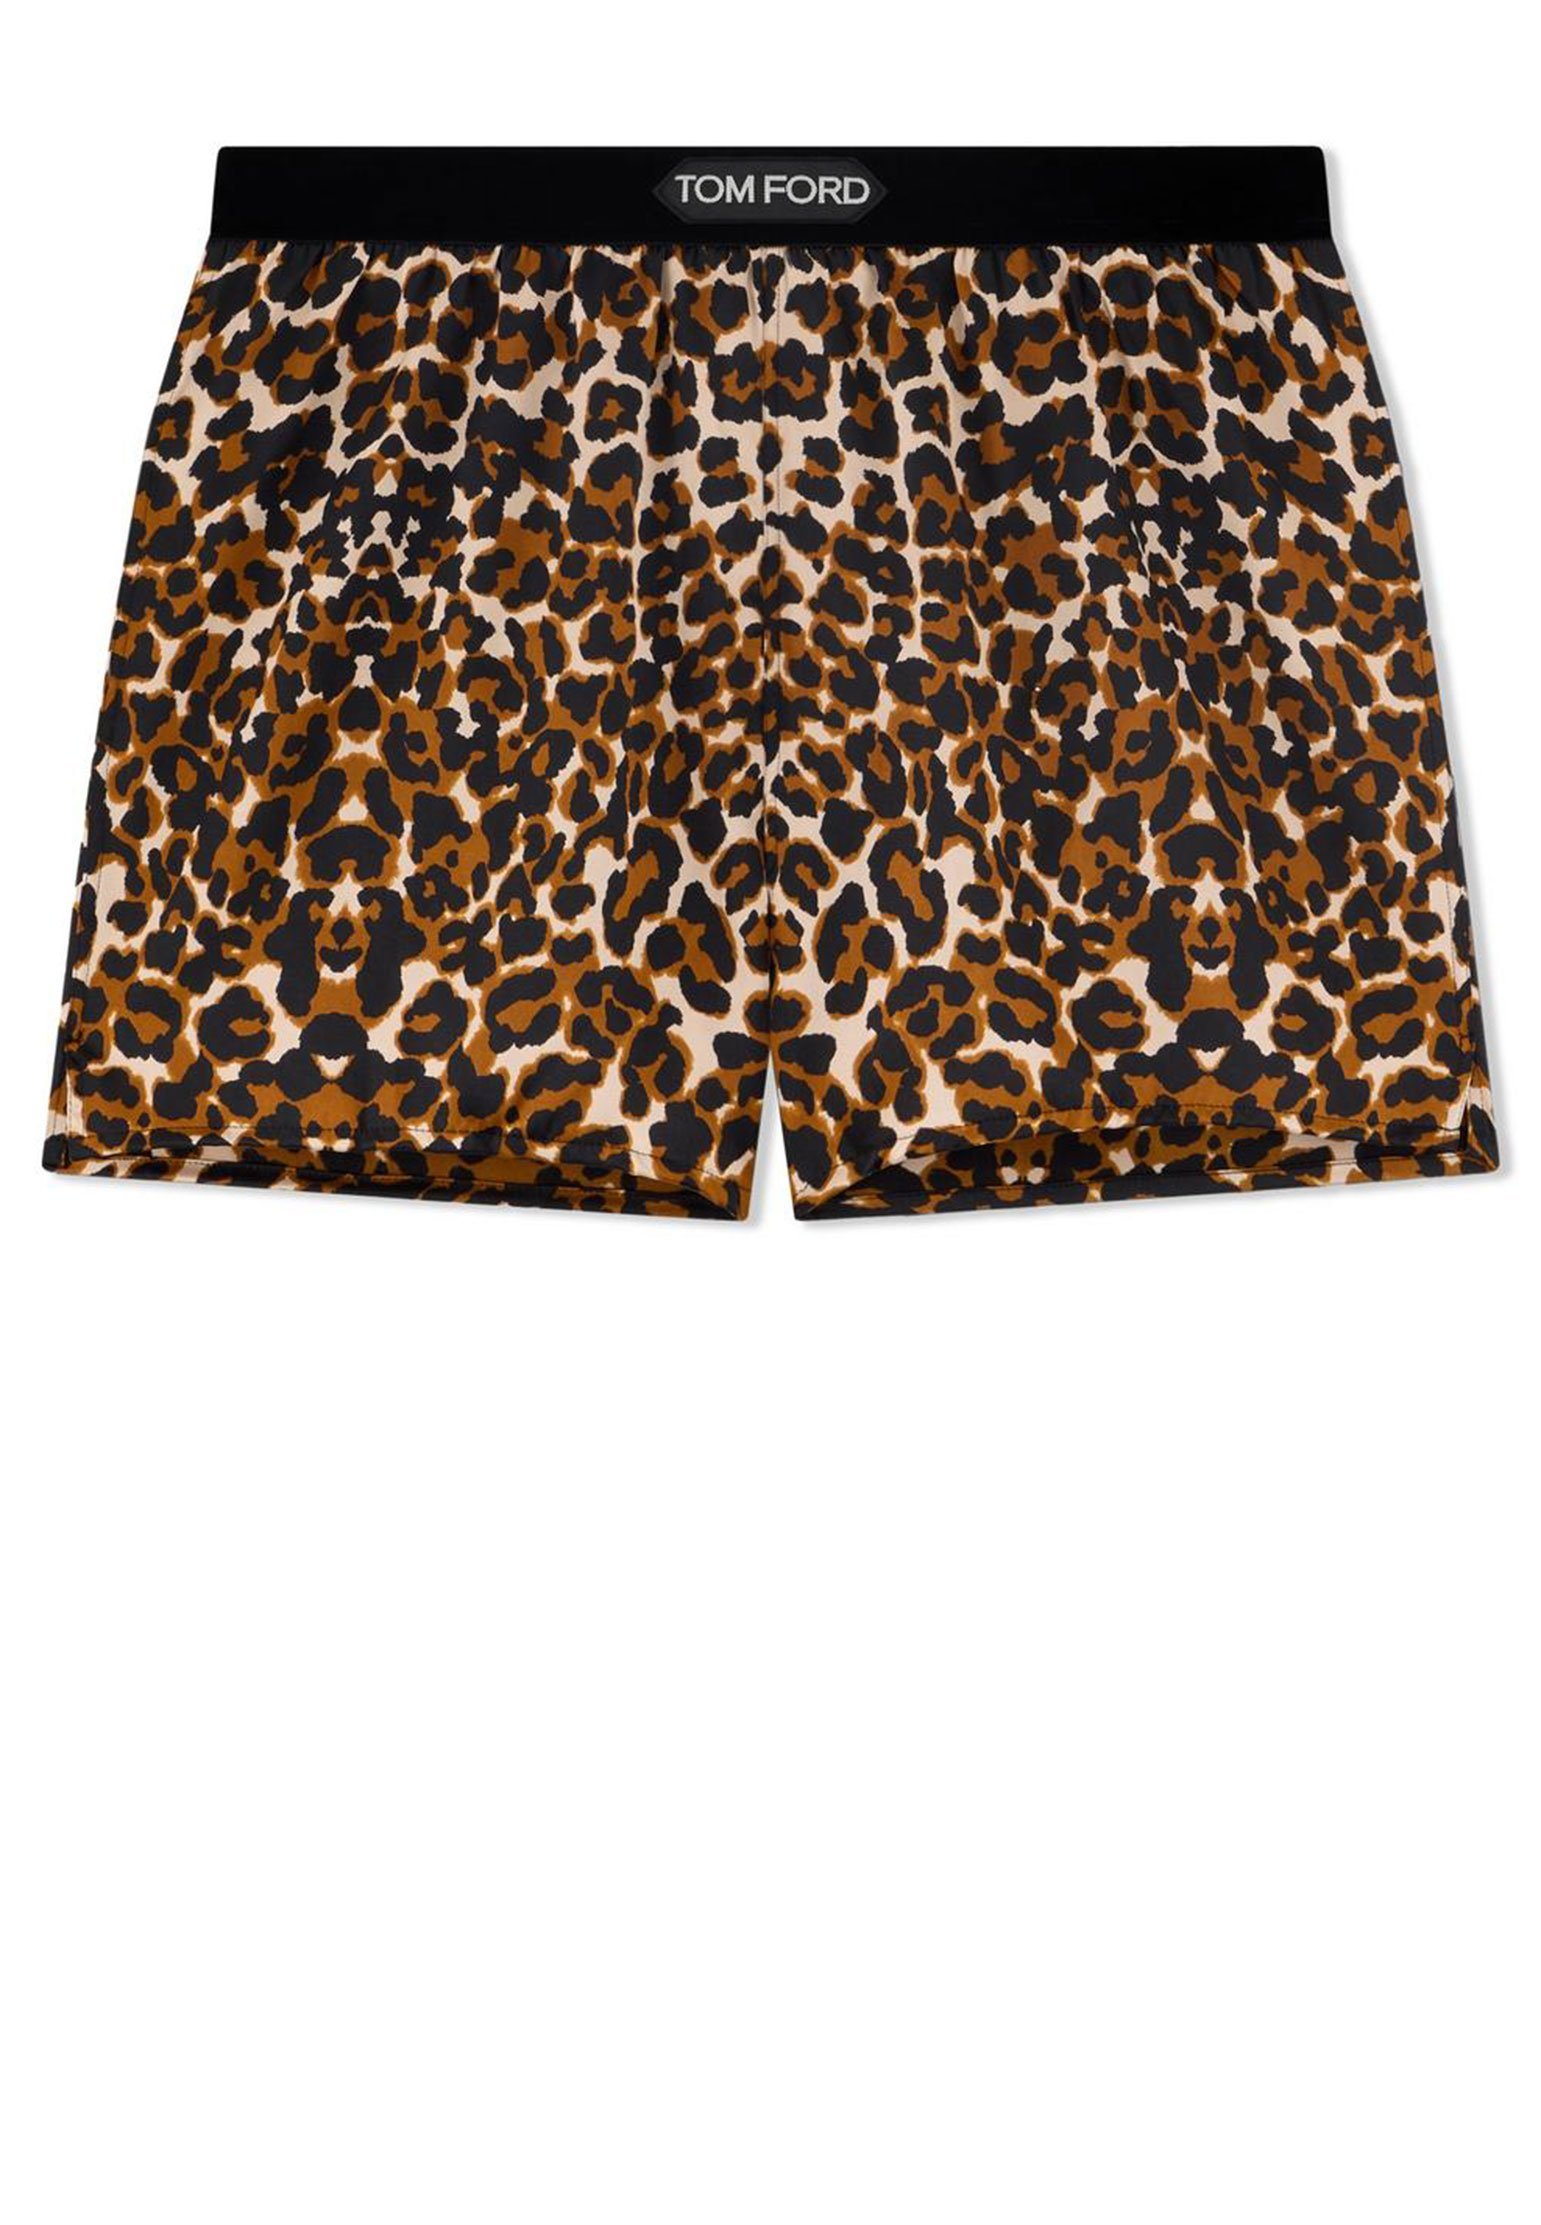 Shorts TOM FORD Color: brown (Code: 1945) in online store Allure